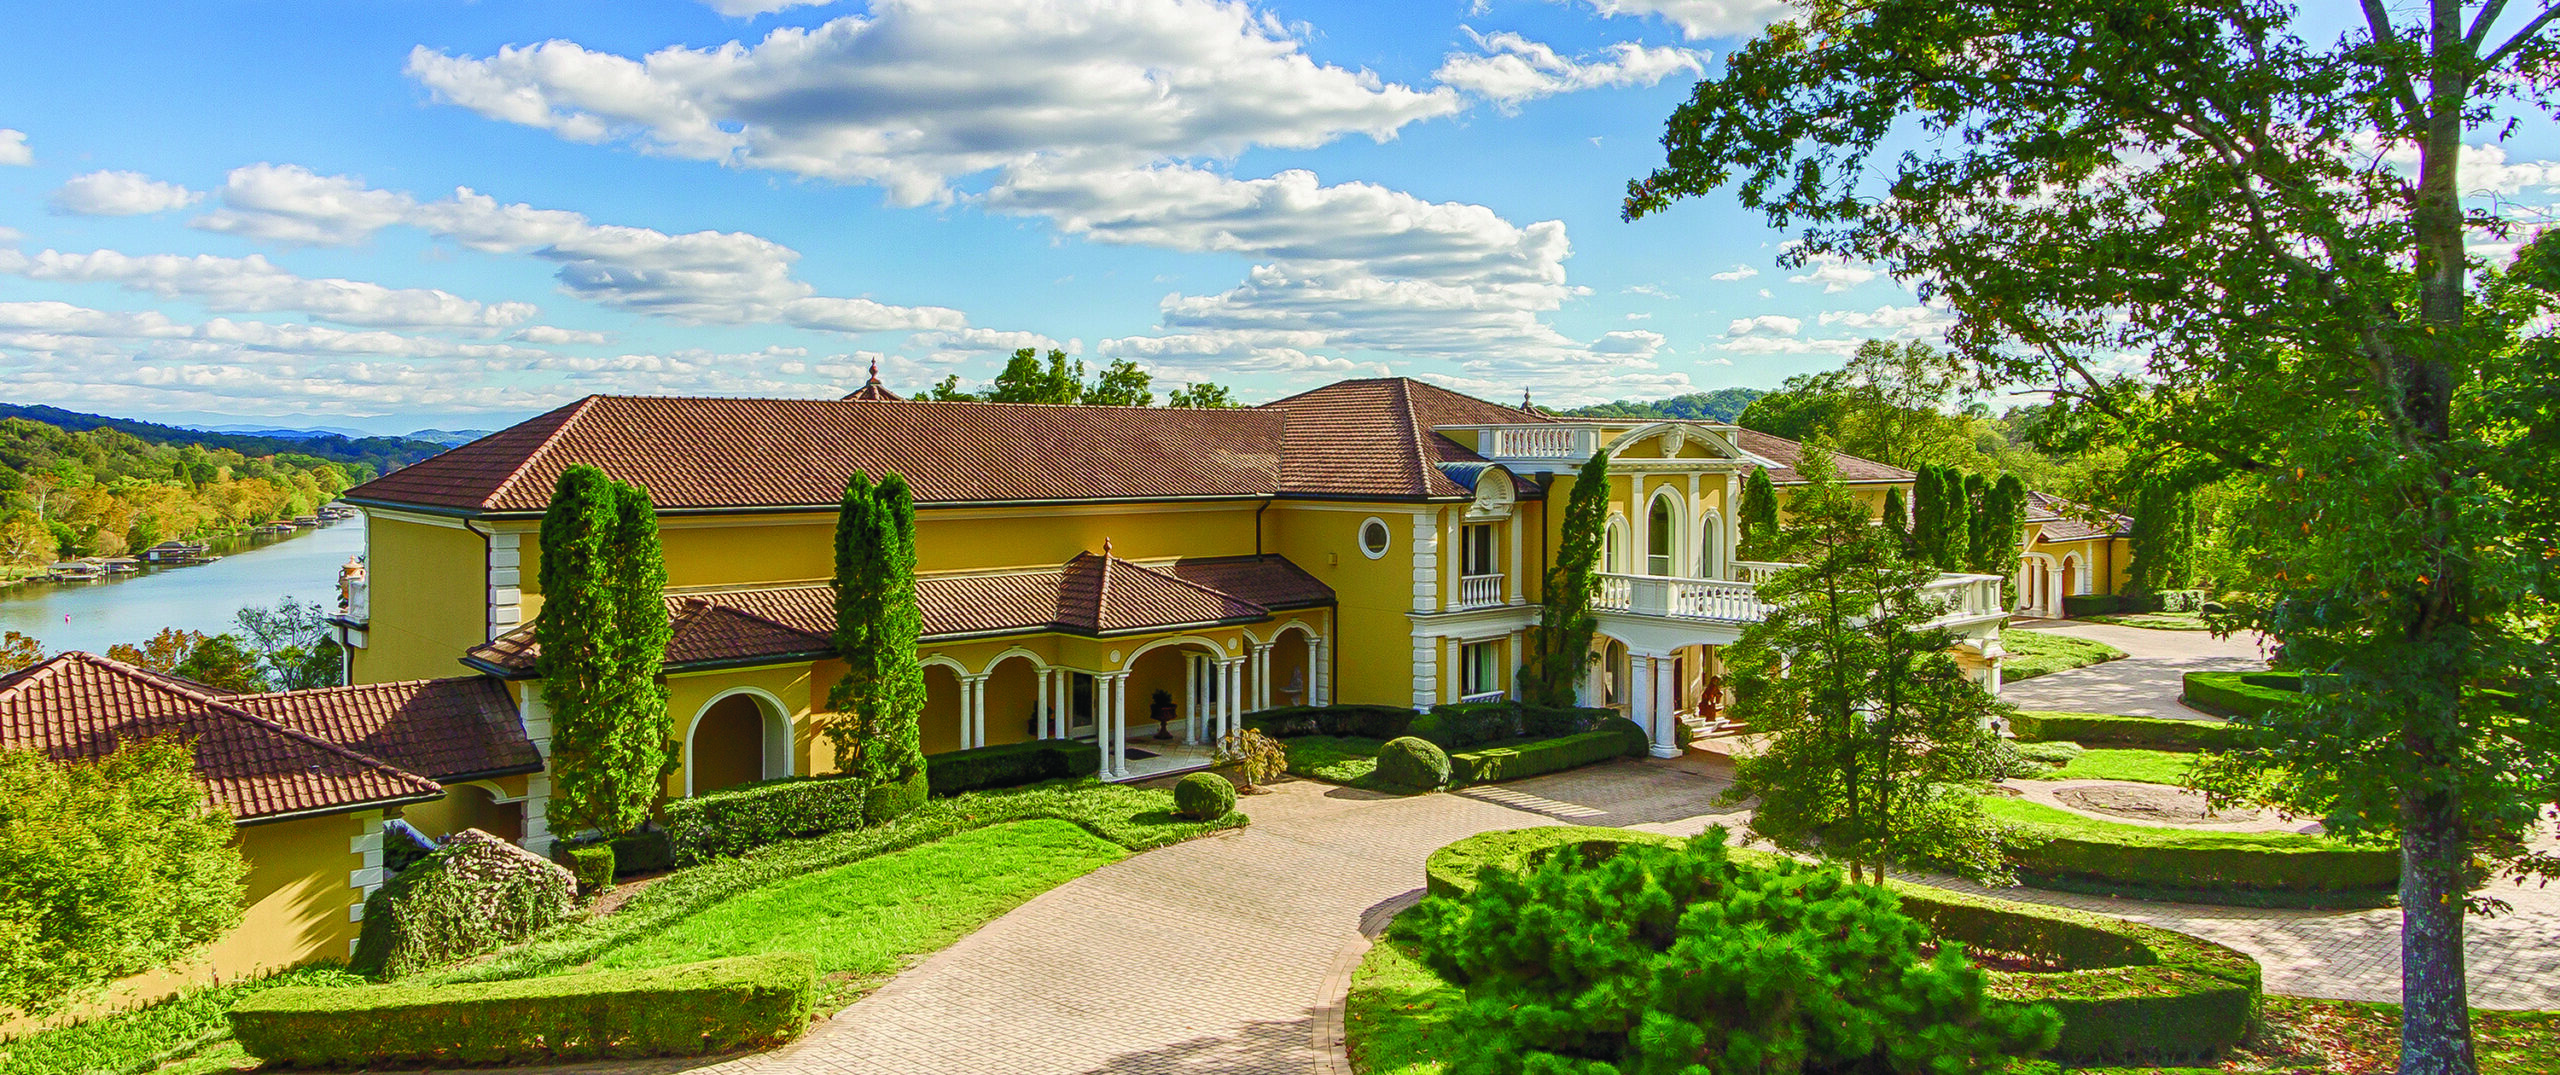 Featured image for “Furrow Auction Company to auction contents of 40,250-square-foot mansion Villa Collina”